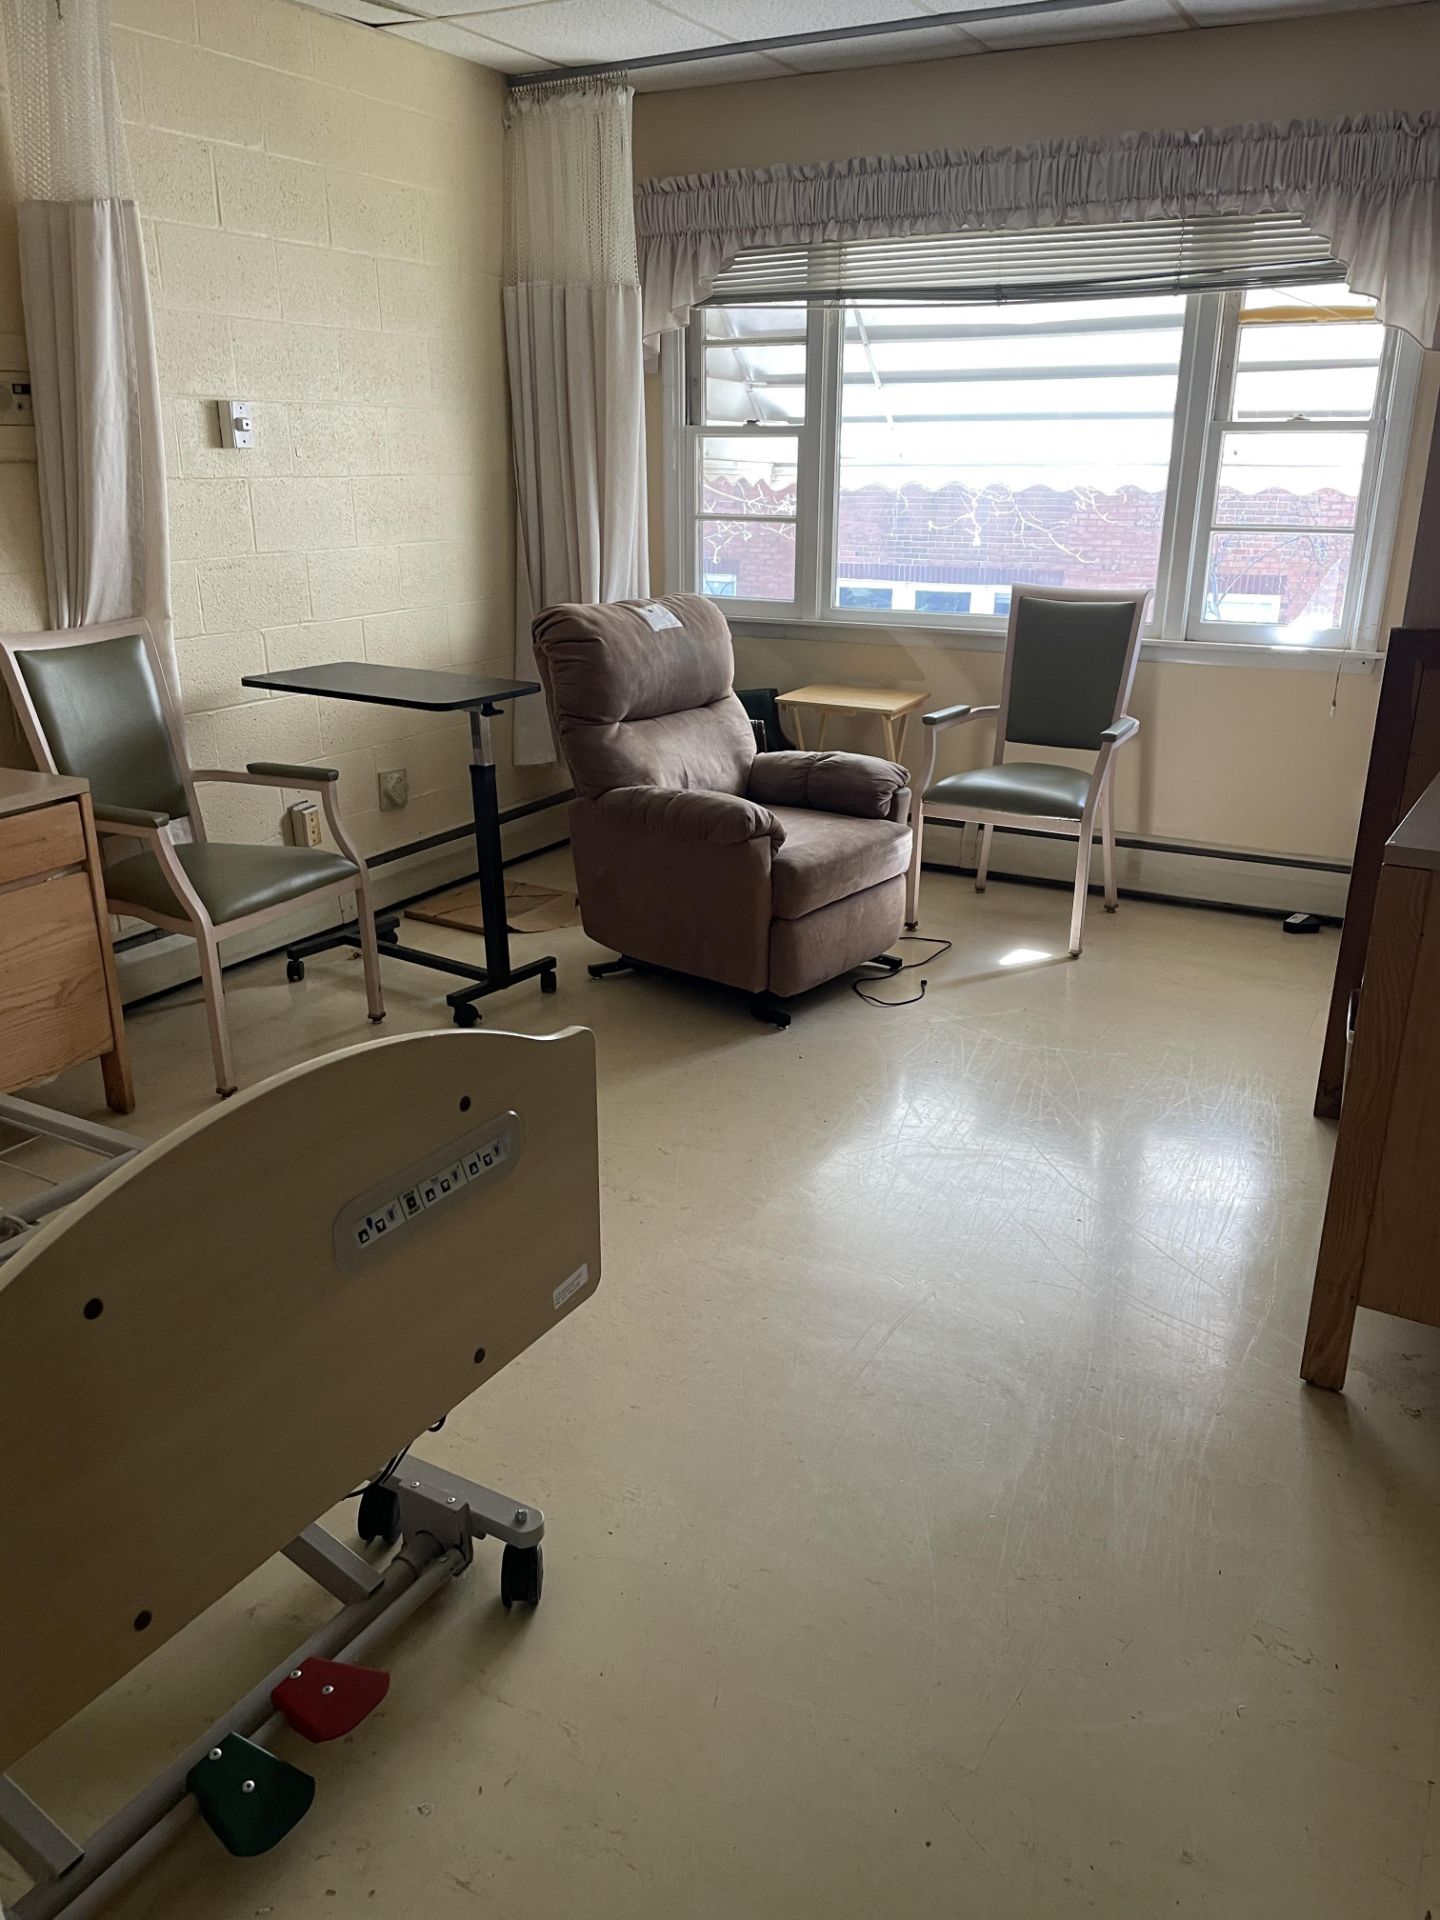 {LOT} In Wing in Standard Rehabilitation Room (18 Rooms - 24 to 39) c/o: (18) Zenith 807 Series - Image 3 of 13